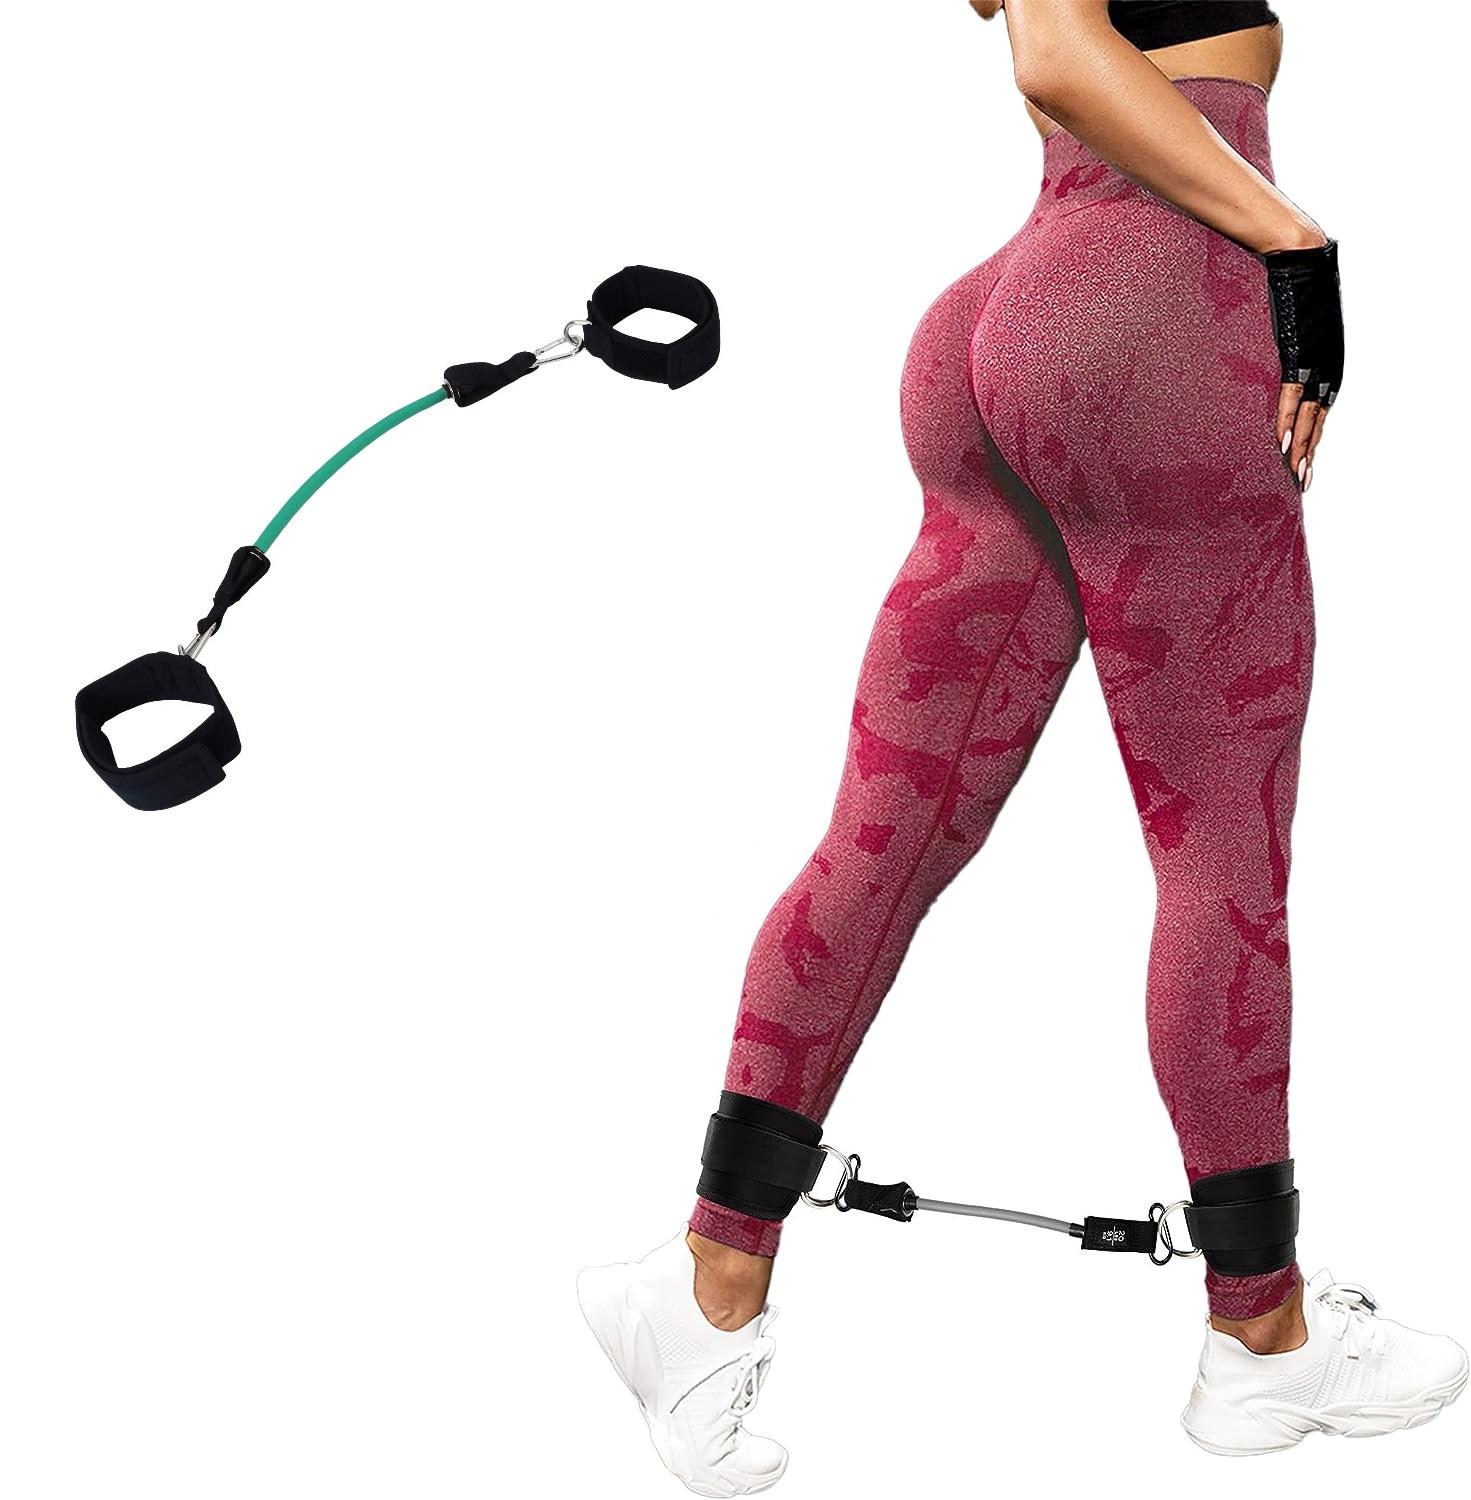 Ankle resistance Bands for Working Out for female